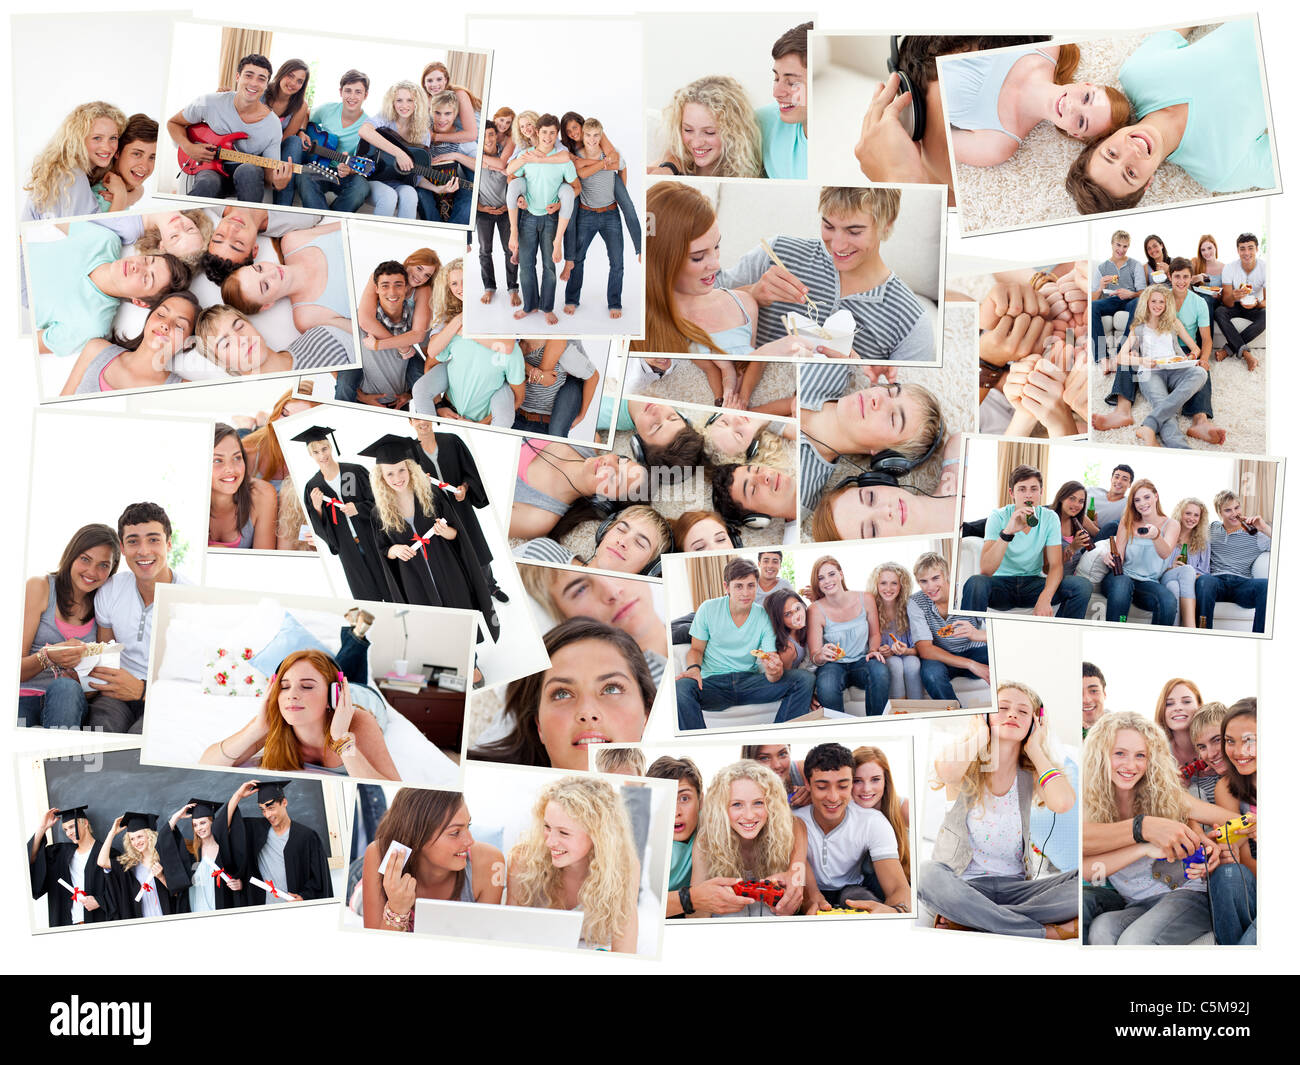 Collage of groups of young people having fun together Stock Photo